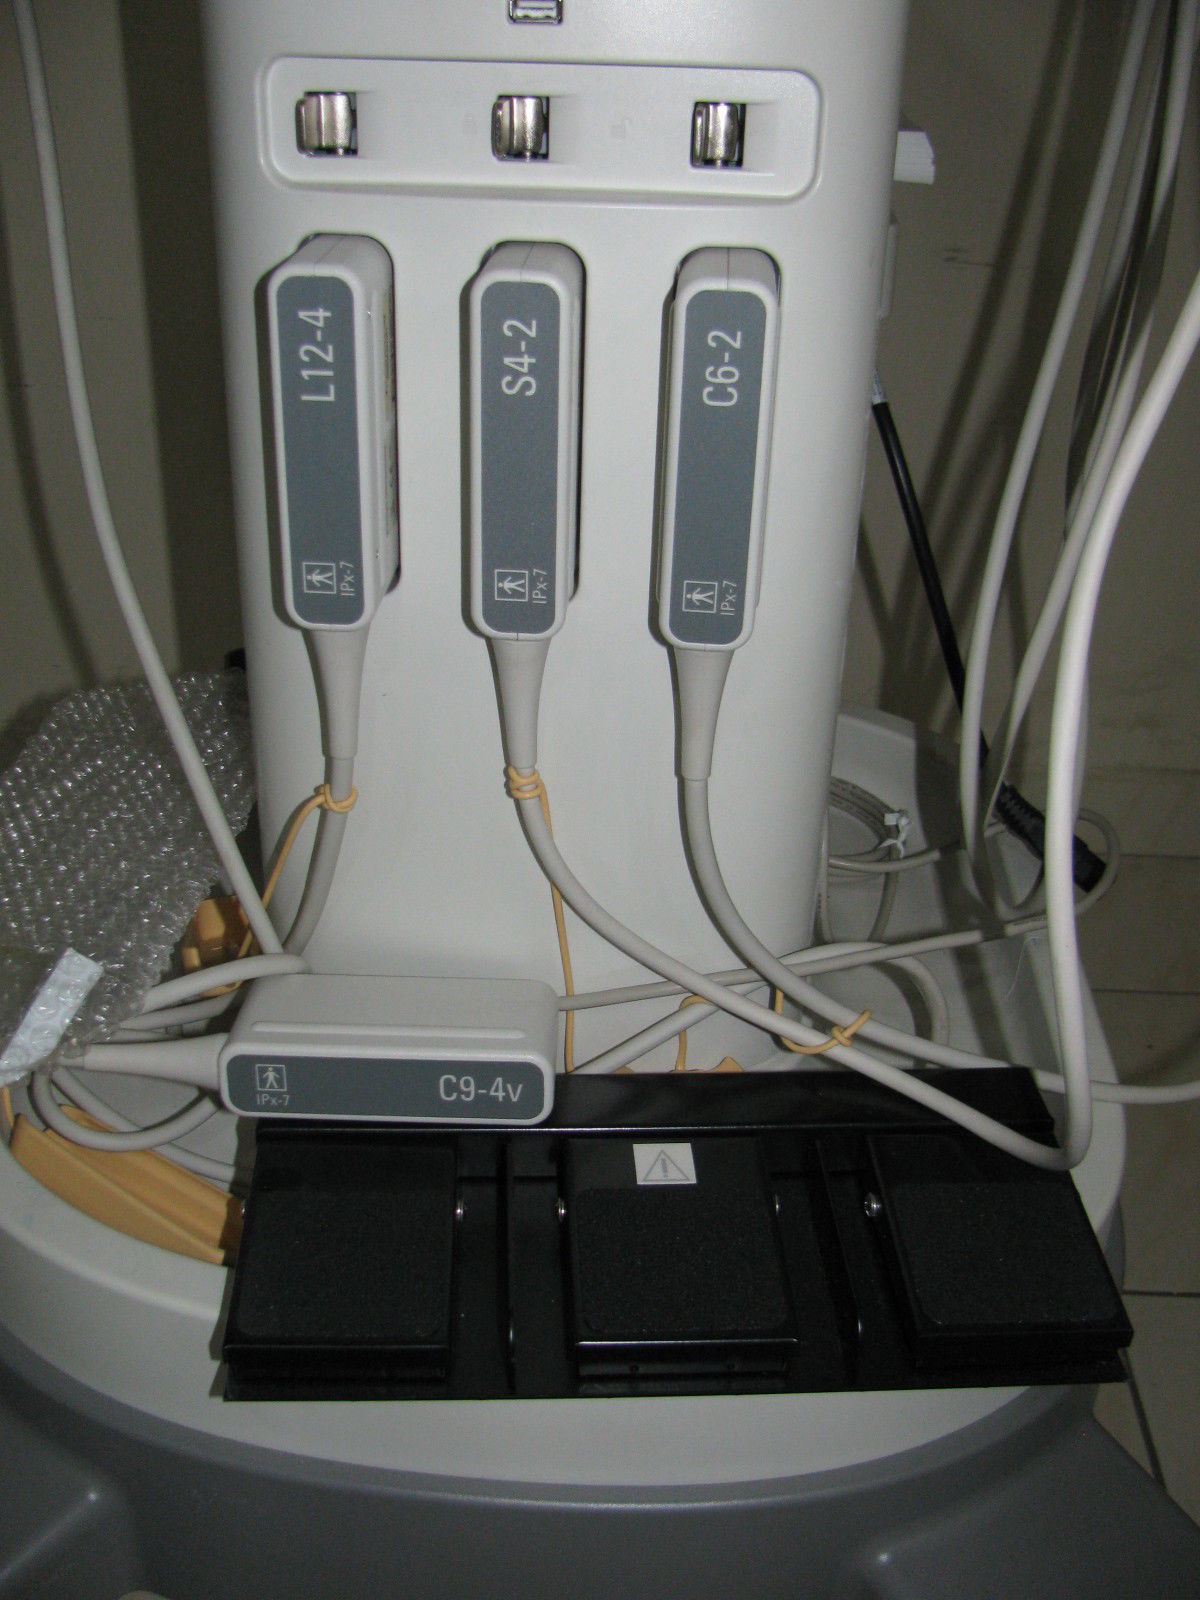 Philips Sparq ultrasound machine with 4 probes. All functions are enabled!